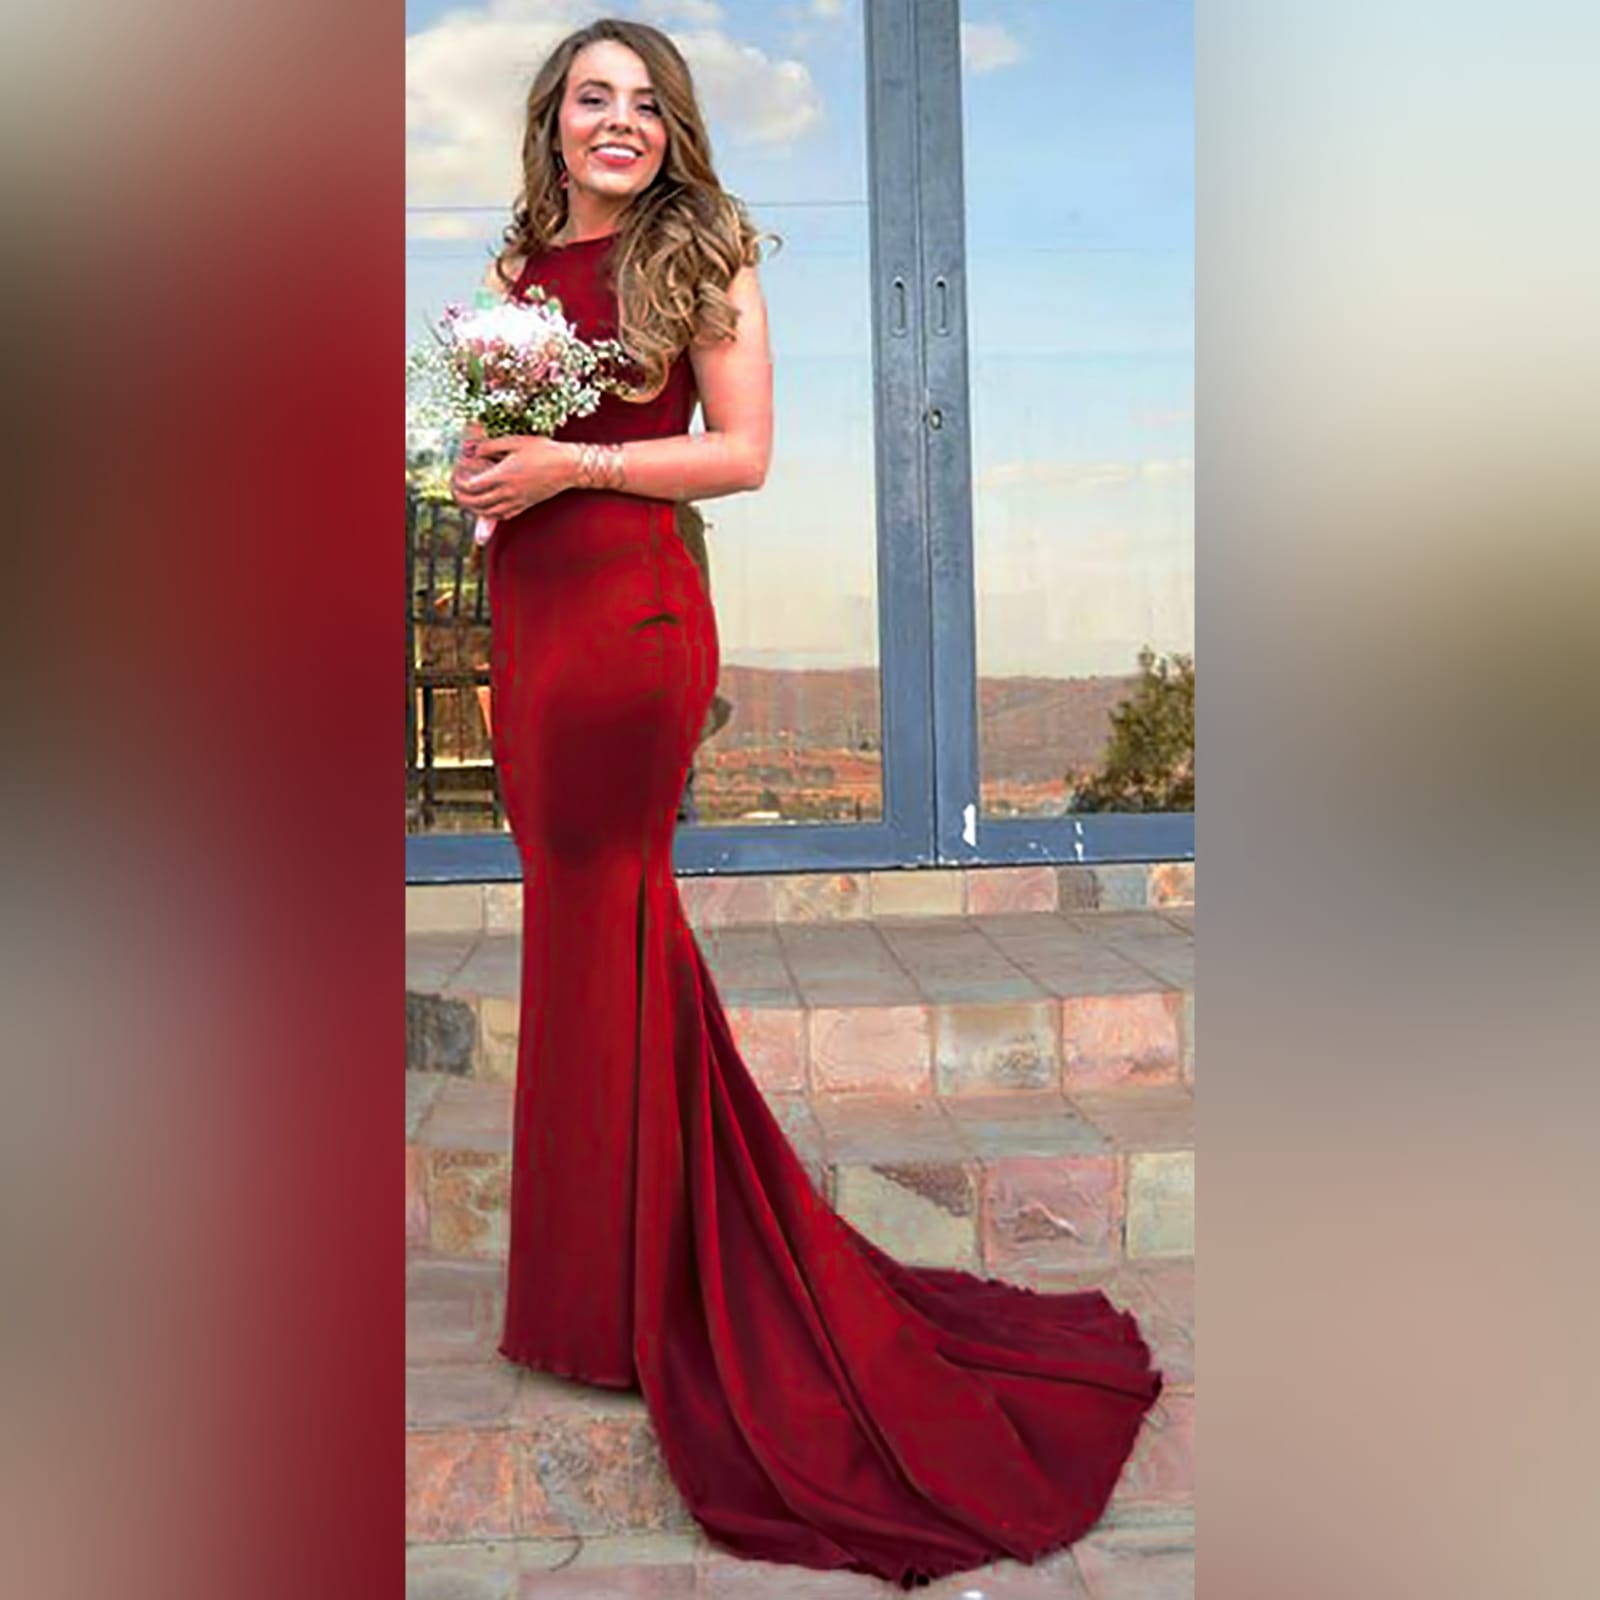 Maroon simple soft mermaid prom dress 2 maroon simple soft mermaid prom dress with a jewel neckline and a low rounded open back, thin shoulder straps and a train.